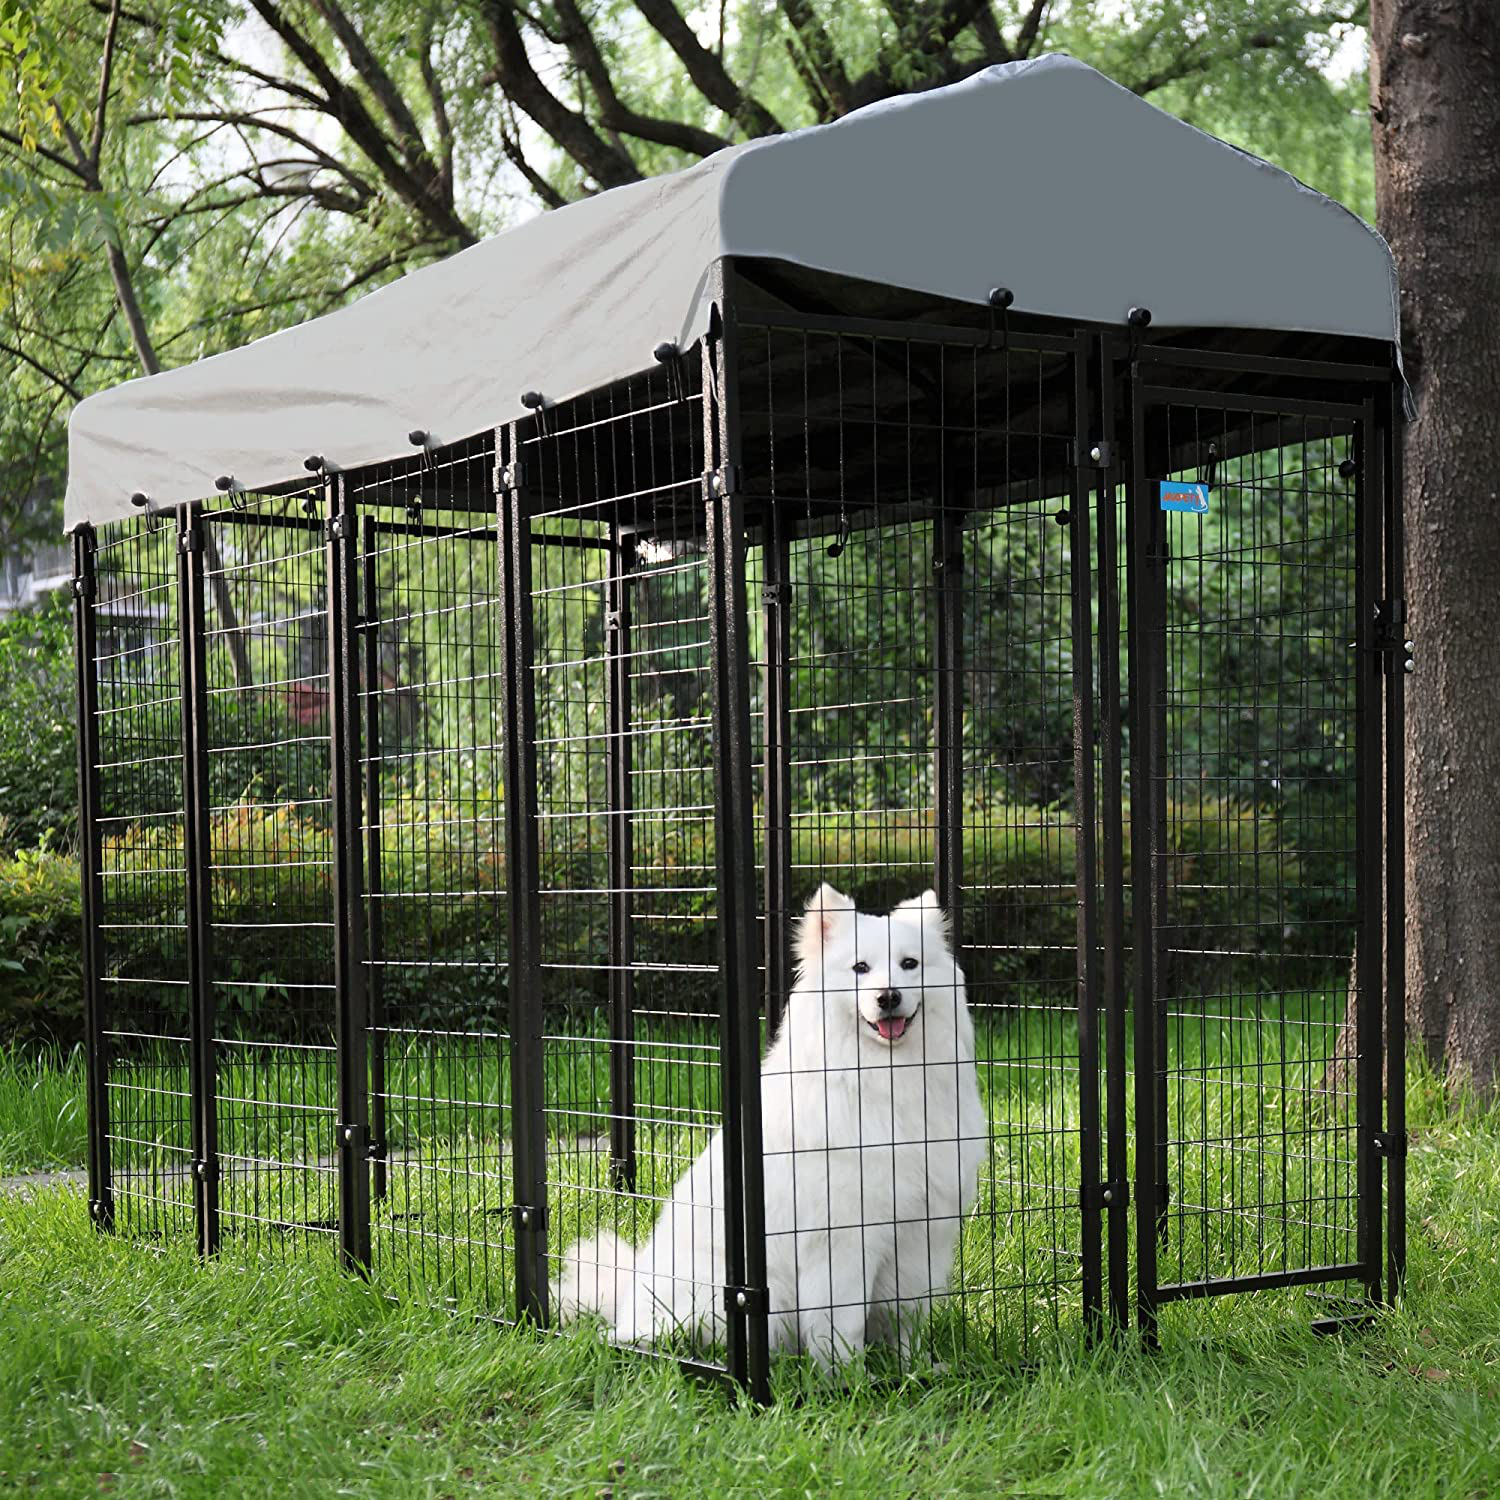 JAXPETY Large Dog Uptown Welded Wire Kennel Outdoor Pen outside Exercise Crate Pet Wire Cage W/ Roof